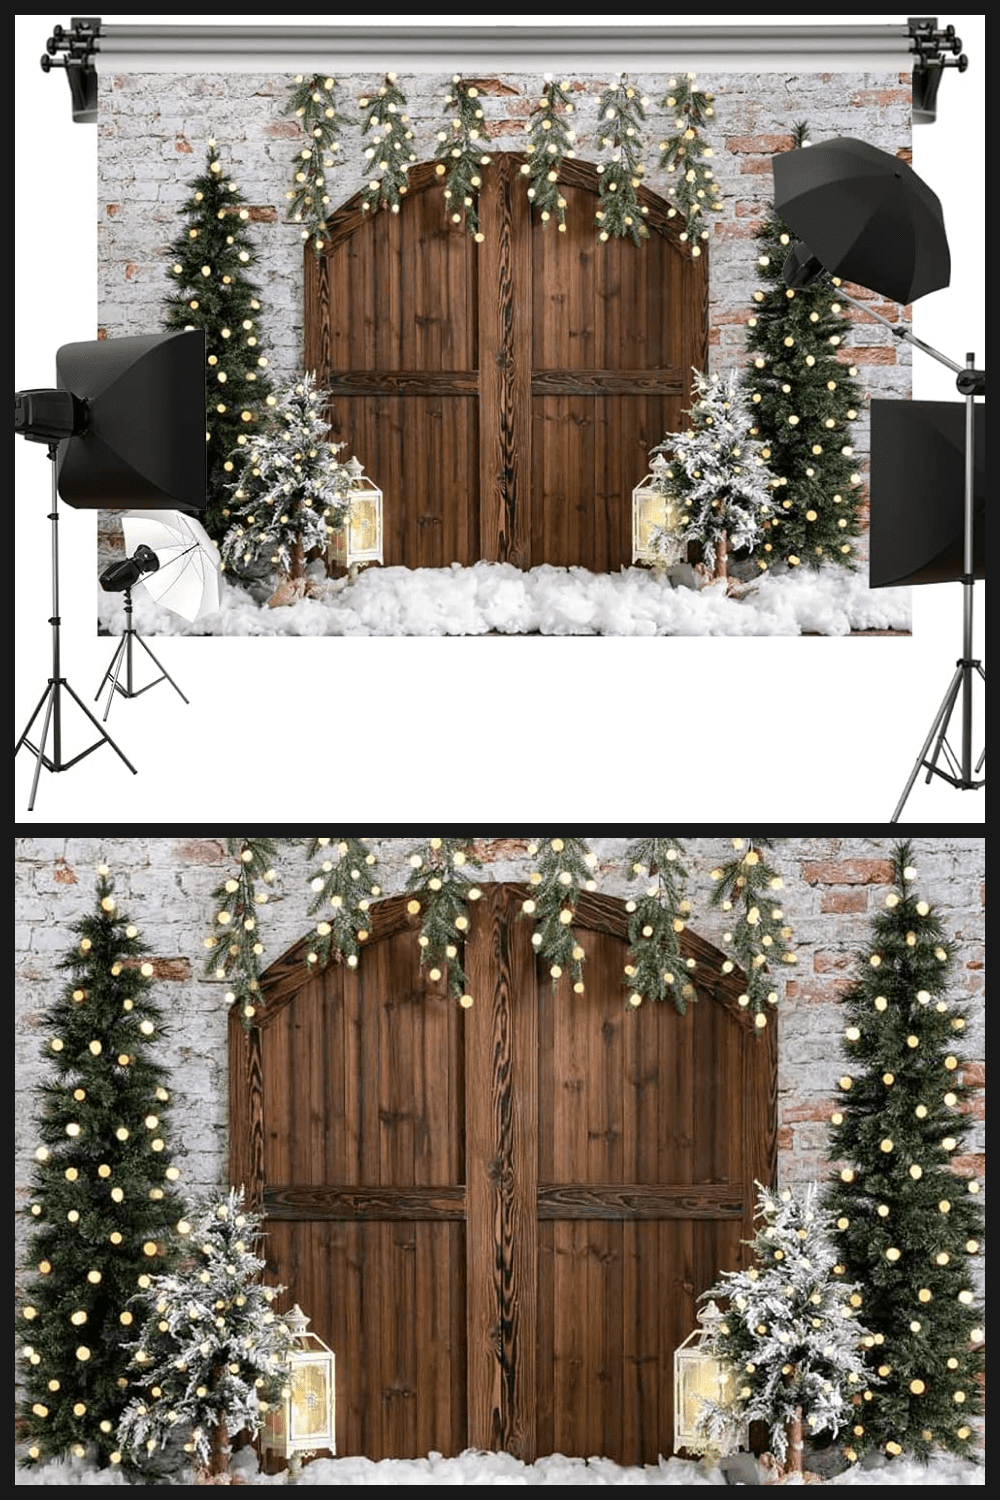 Image of a wooden gate in the wall with decorated Christmas trees on the sides.